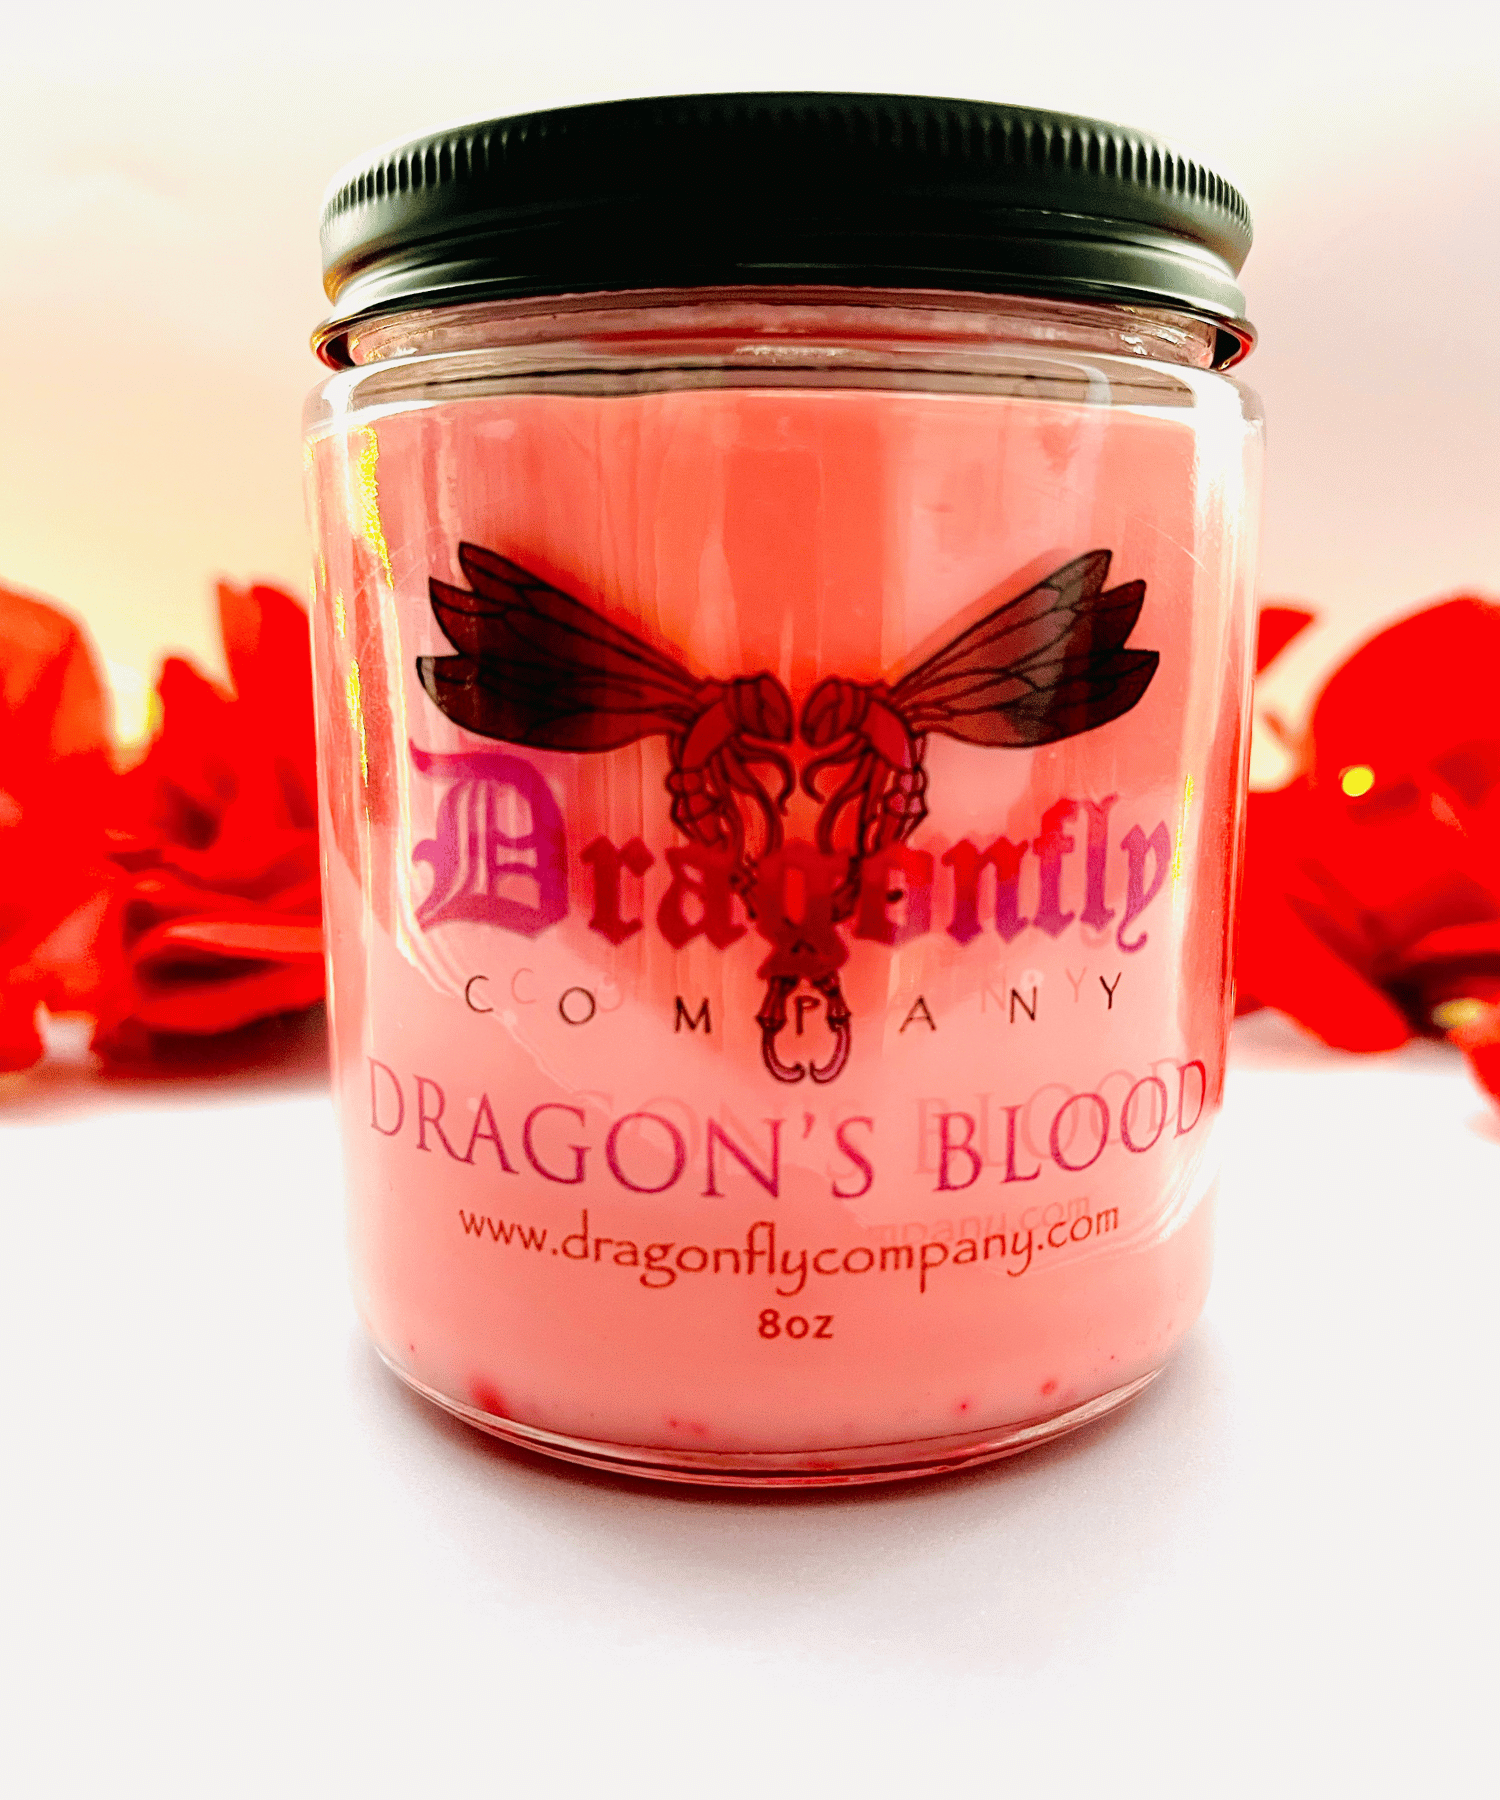 Dragonfly Company's exotic new candle .